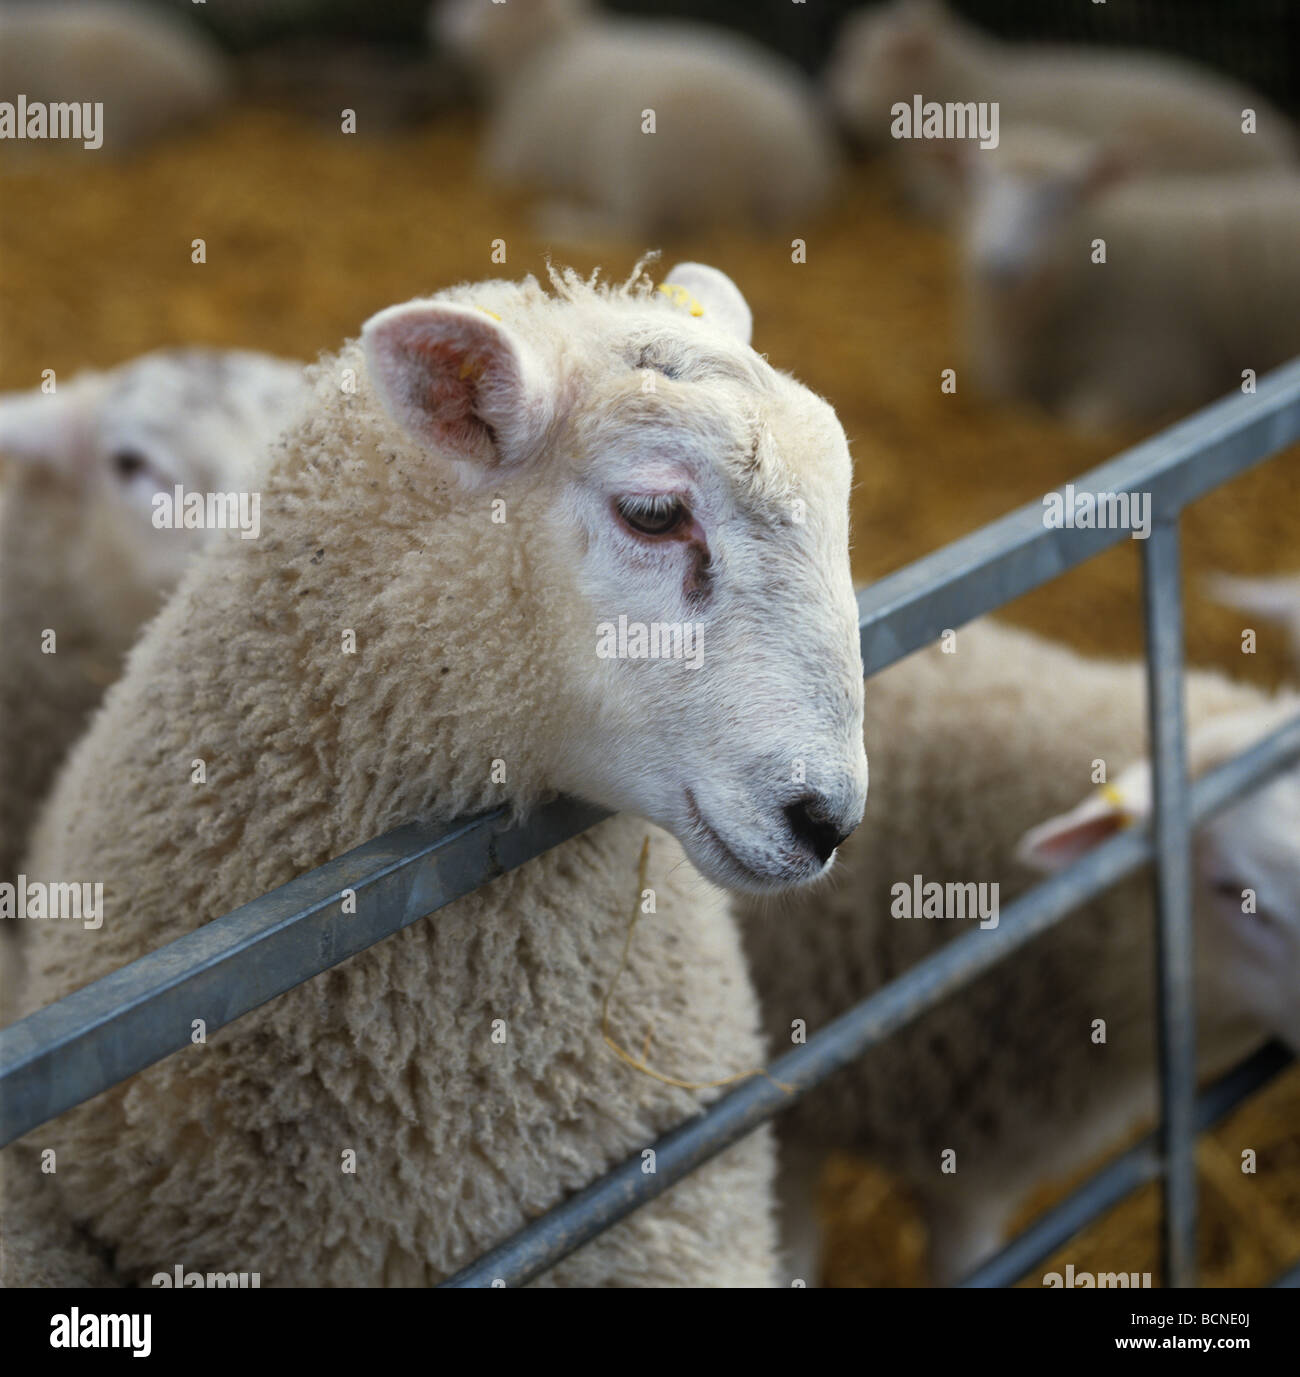 Texel X lamb looking over a metal hurdle in a straw bedded polythene house Stock Photo